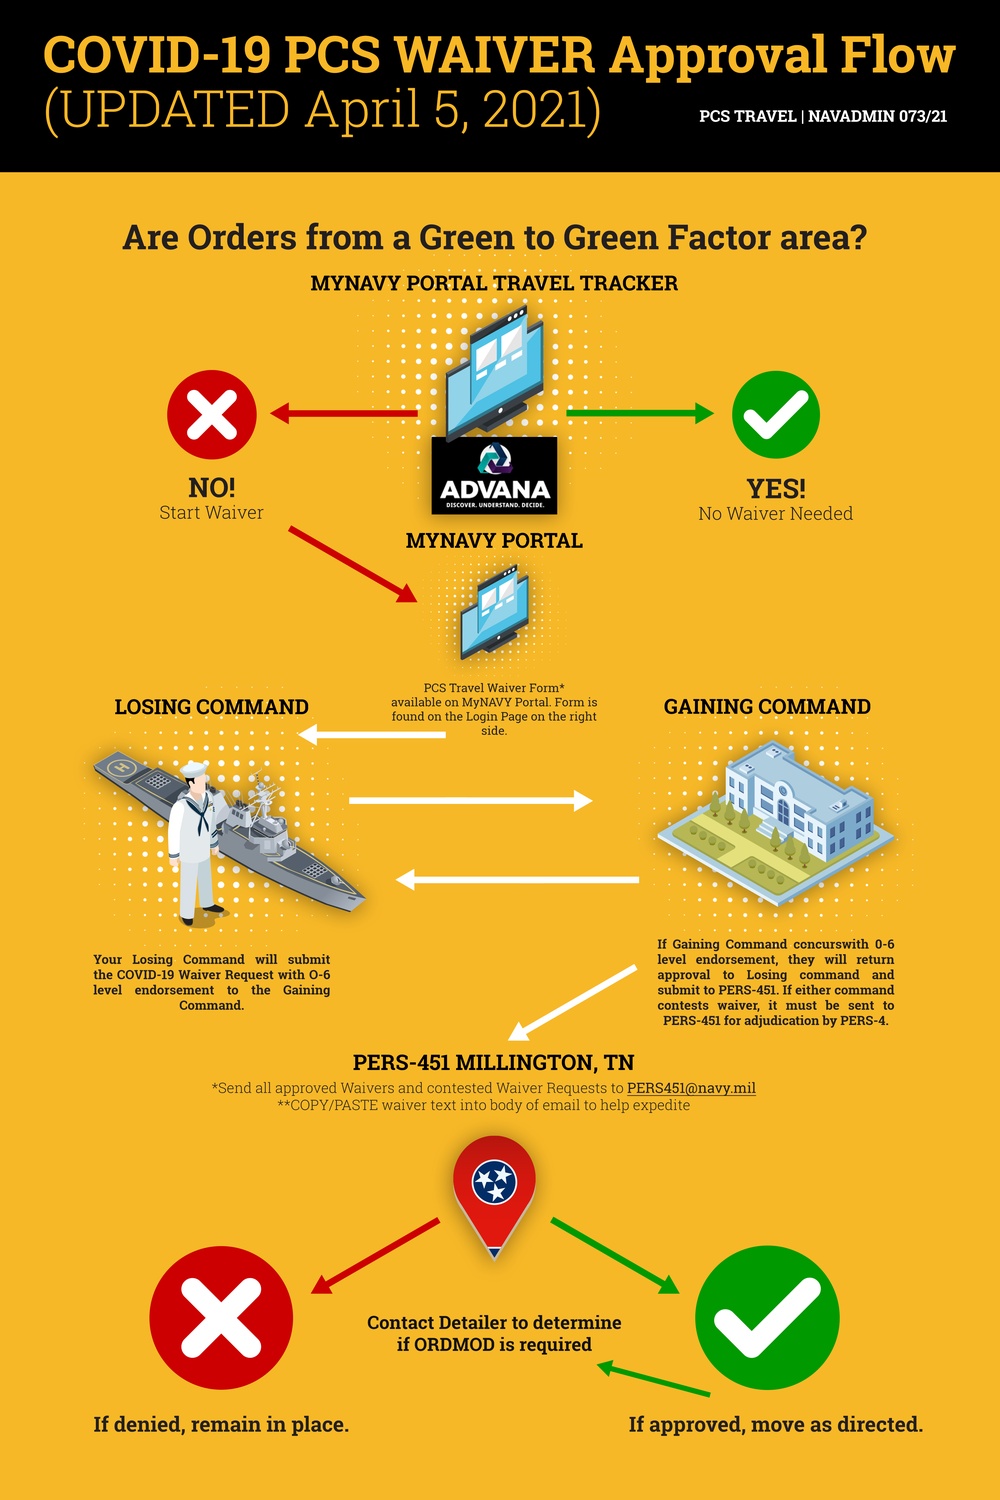 PCS Waiver Approval Flow Infographic